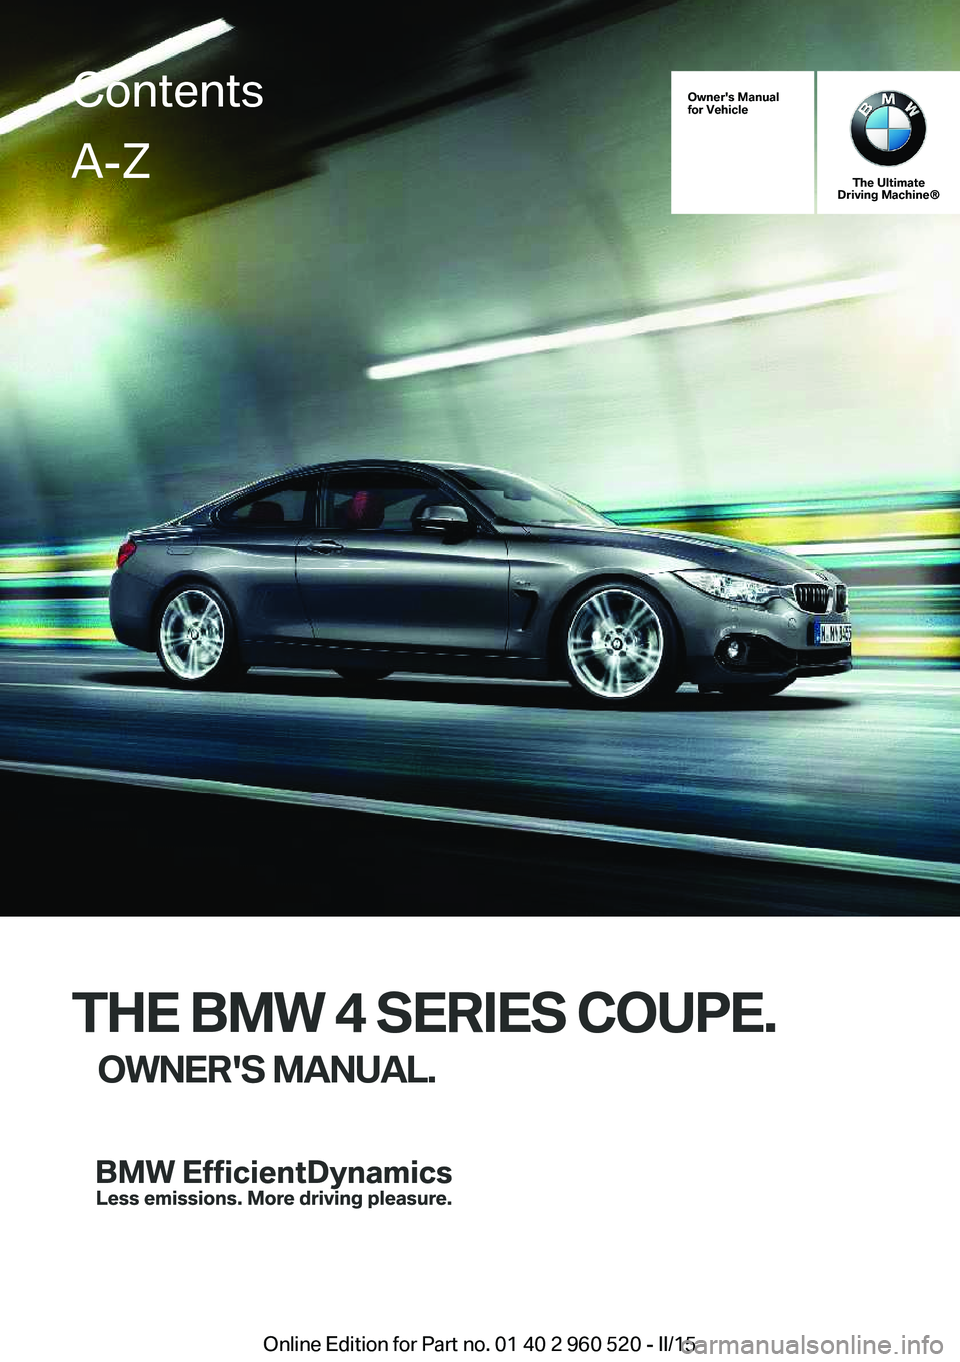 BMW 435I COUPE 2016  Owners Manual Owner's Manual
for Vehicle
The Ultimate
Driving Machine®
THE BMW 4 SERIES COUPE.
OWNER'S MANUAL.
ContentsA-Z
Online Edition for Part no. 01 40 2 960 520 - II/15   